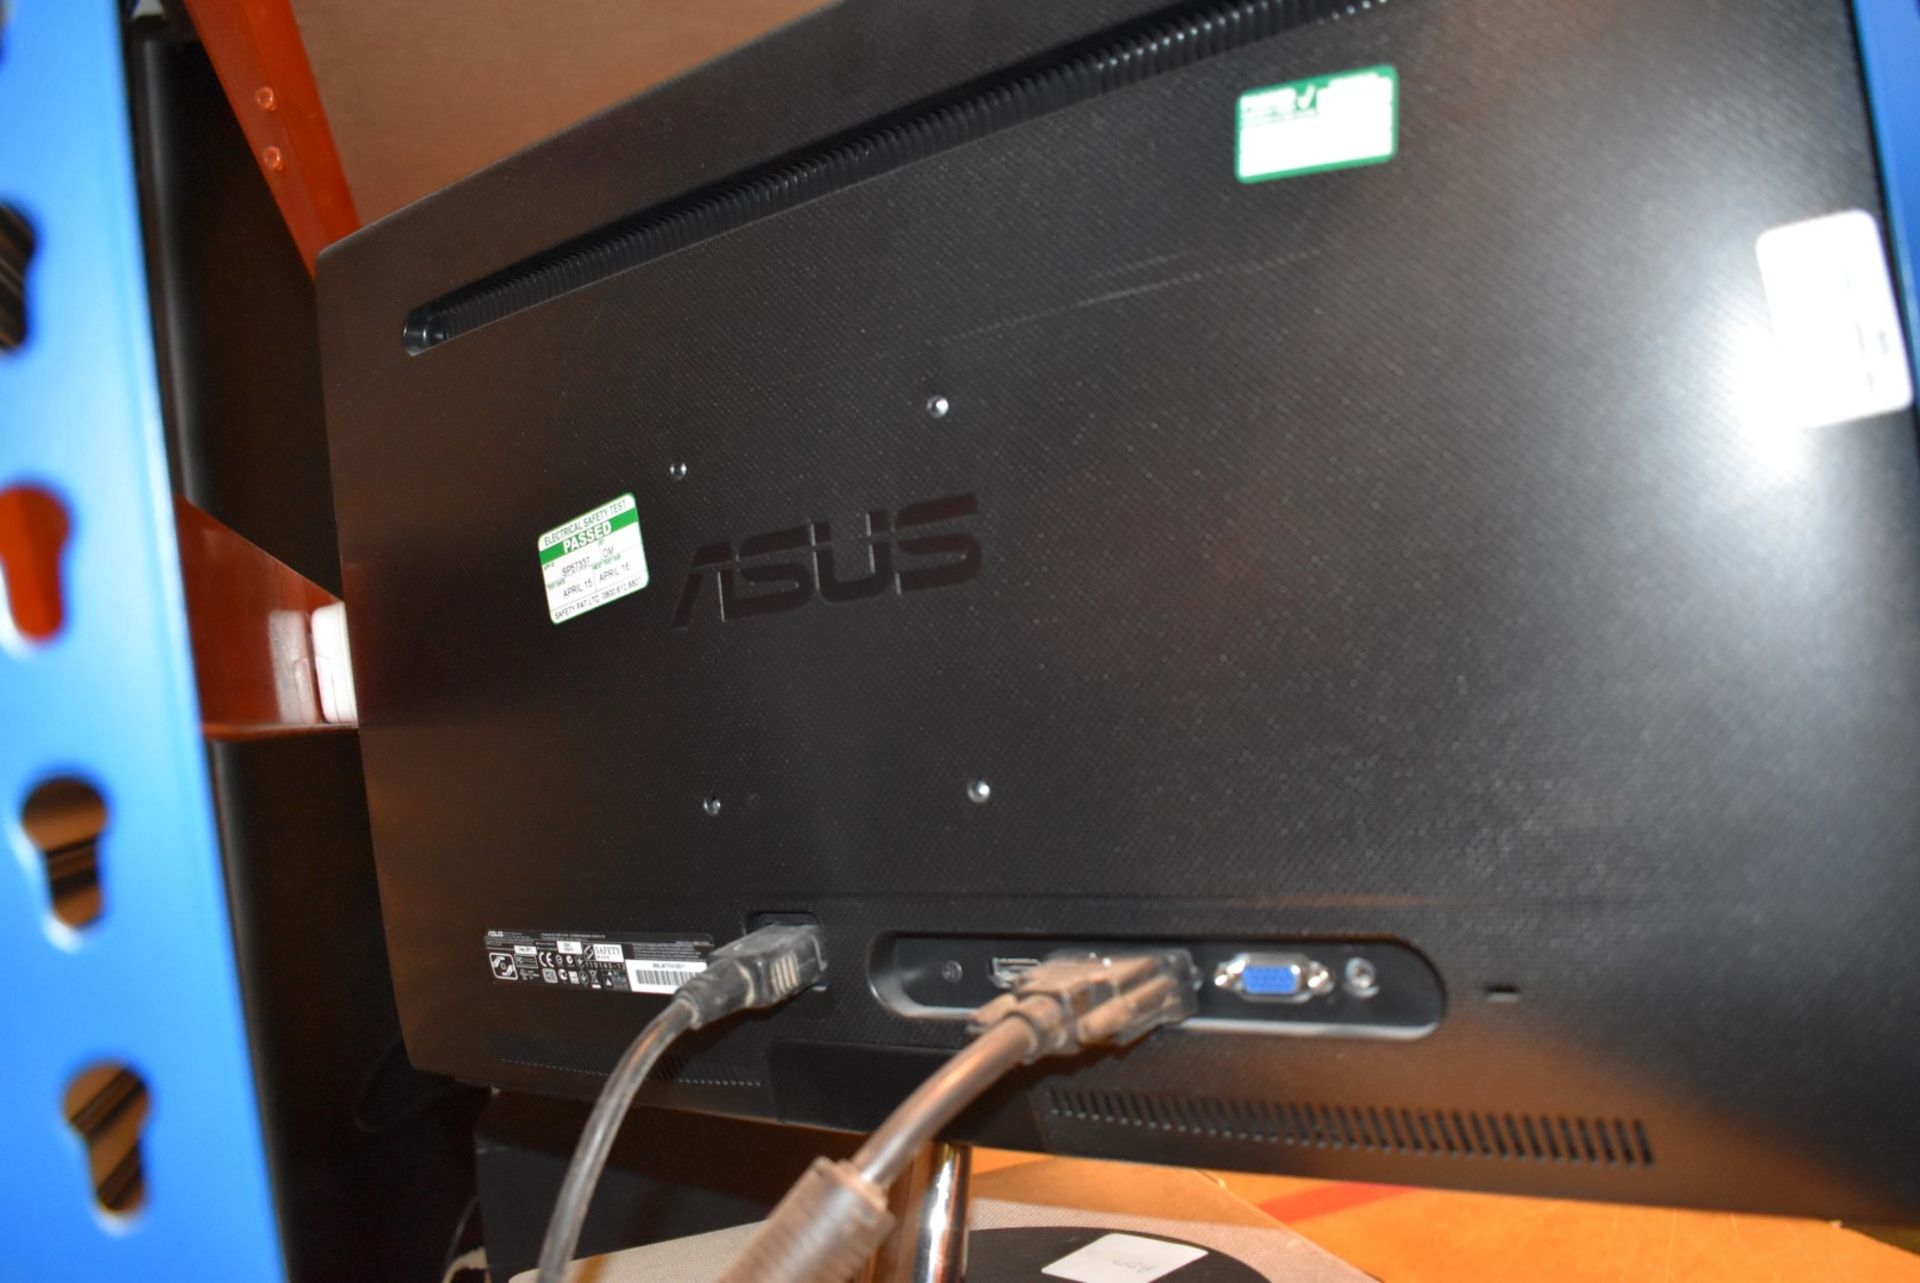 1 x Asus 24 Inch Flatscreen Monitor With a Microsoft Keyboard and Mouse - Includes Power Cable - Image 7 of 8